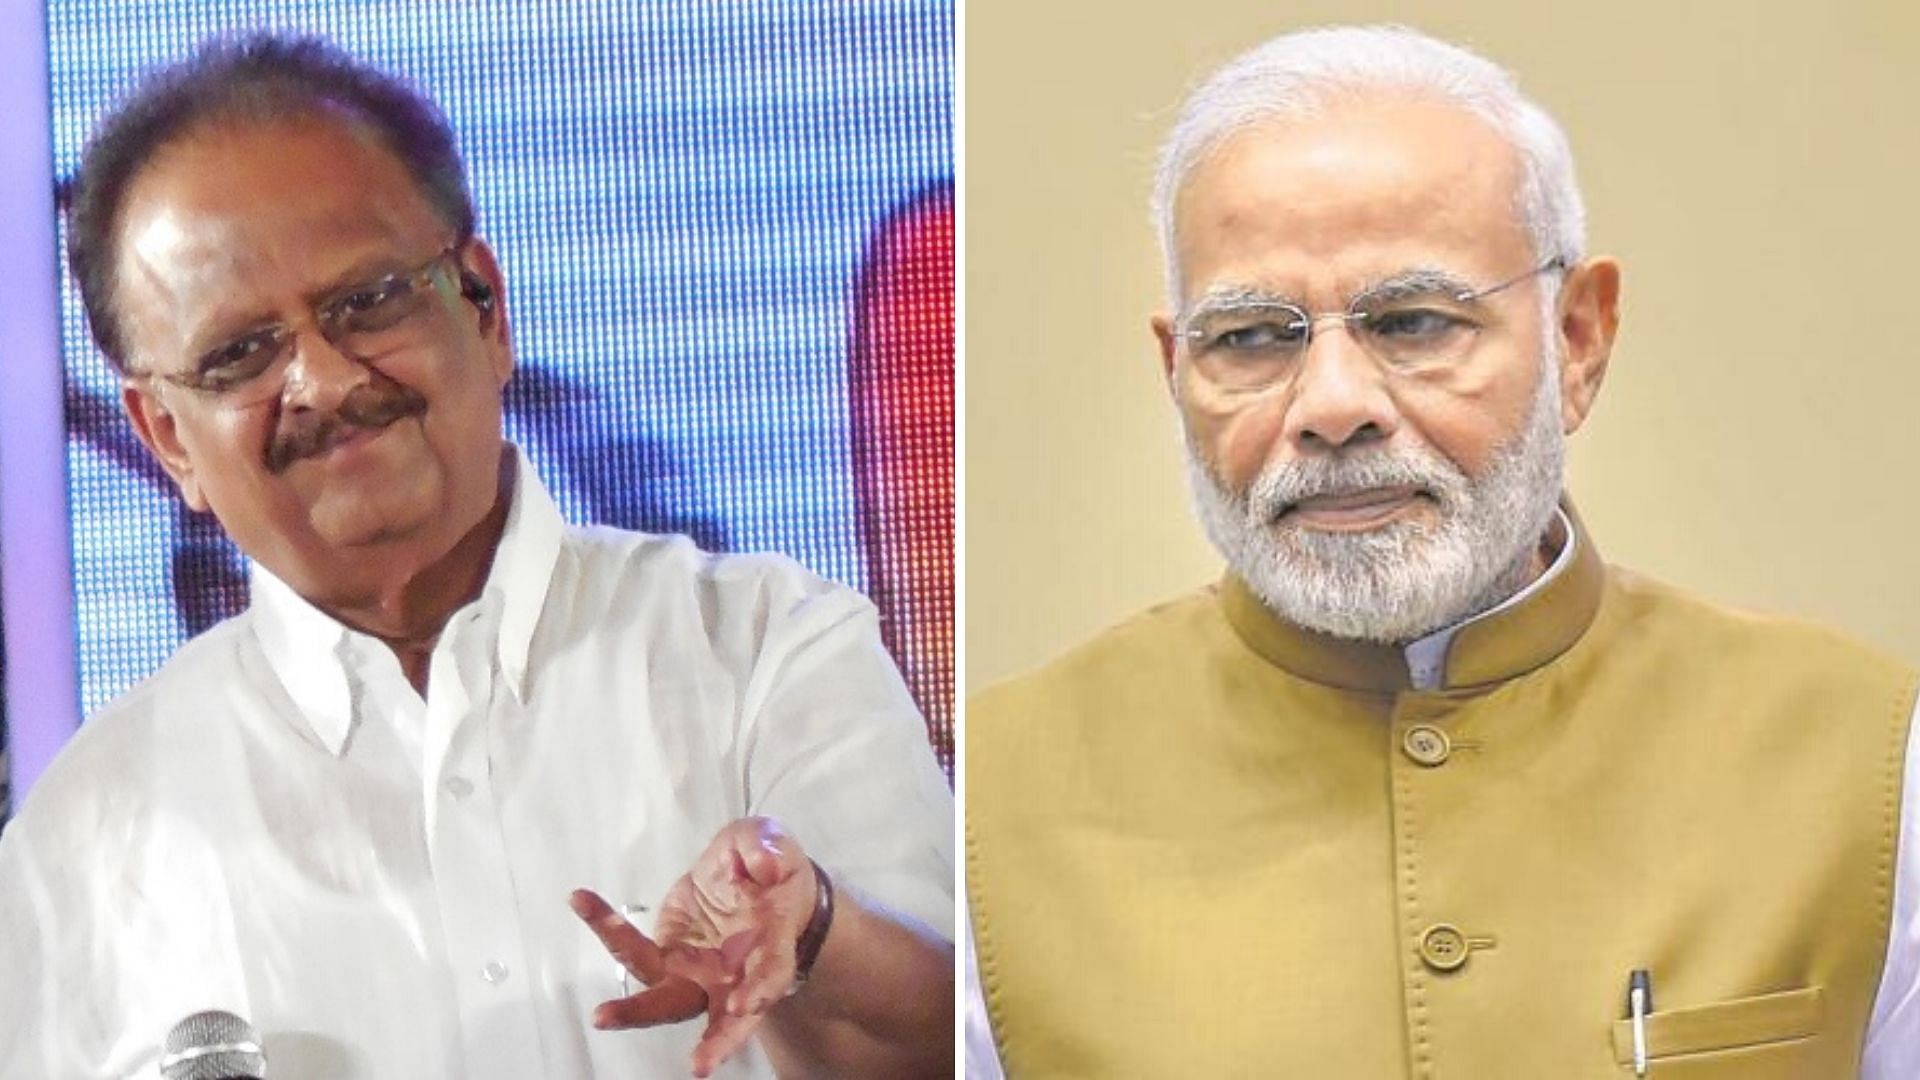 Singer SP Balasubrahmanyam was invited recently for a gathering with the PM.